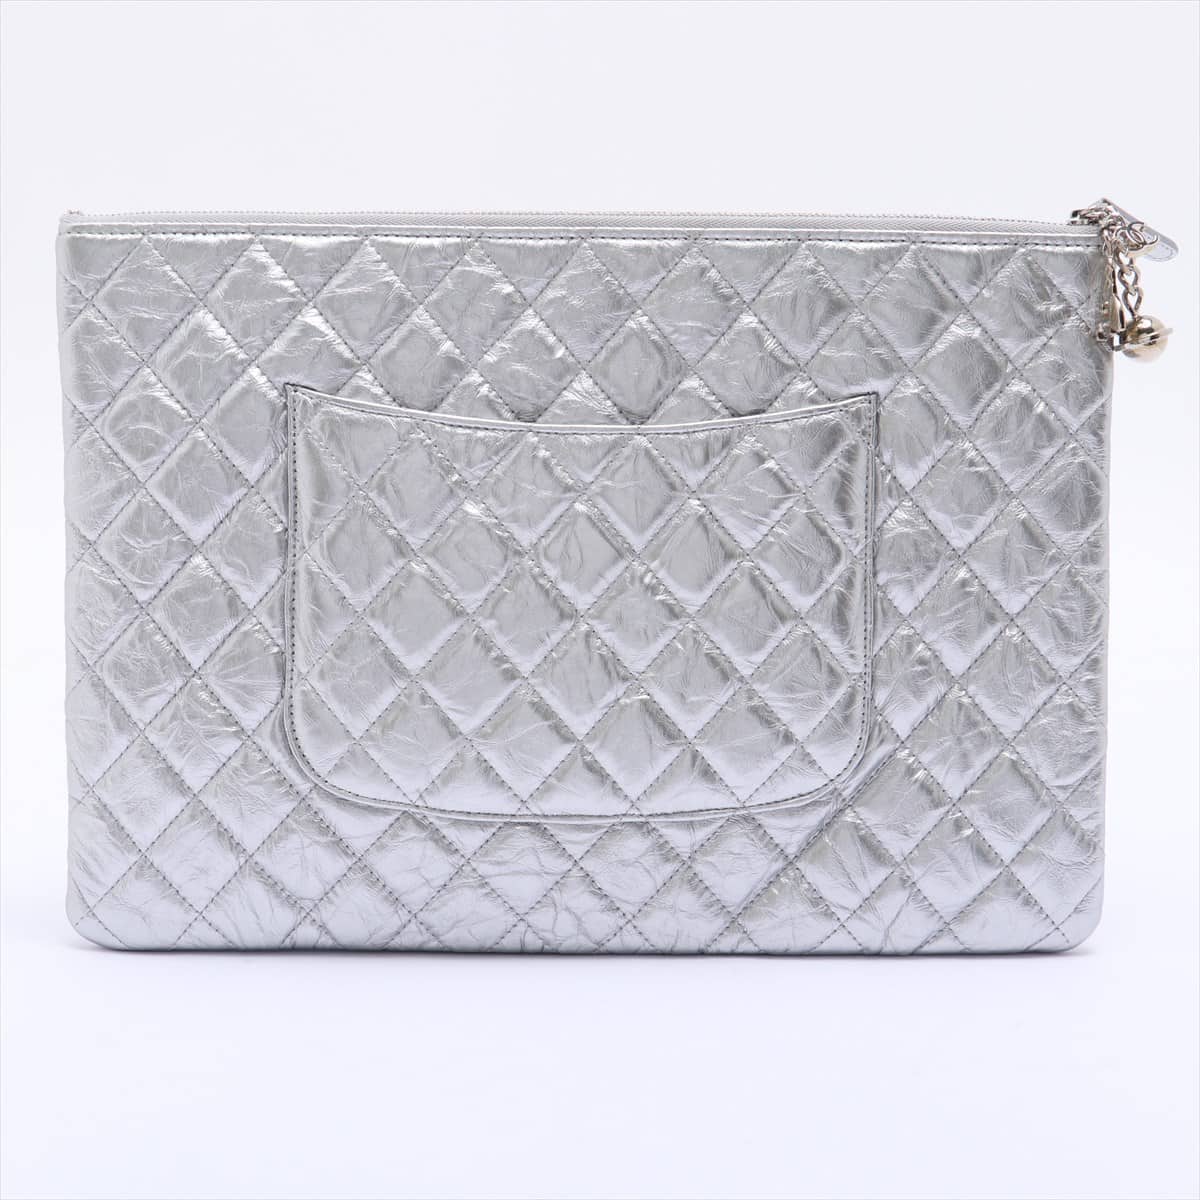 Chanel Matelasse Leather Clutch bag Silver Silver Metal fittings 24XXXXXX